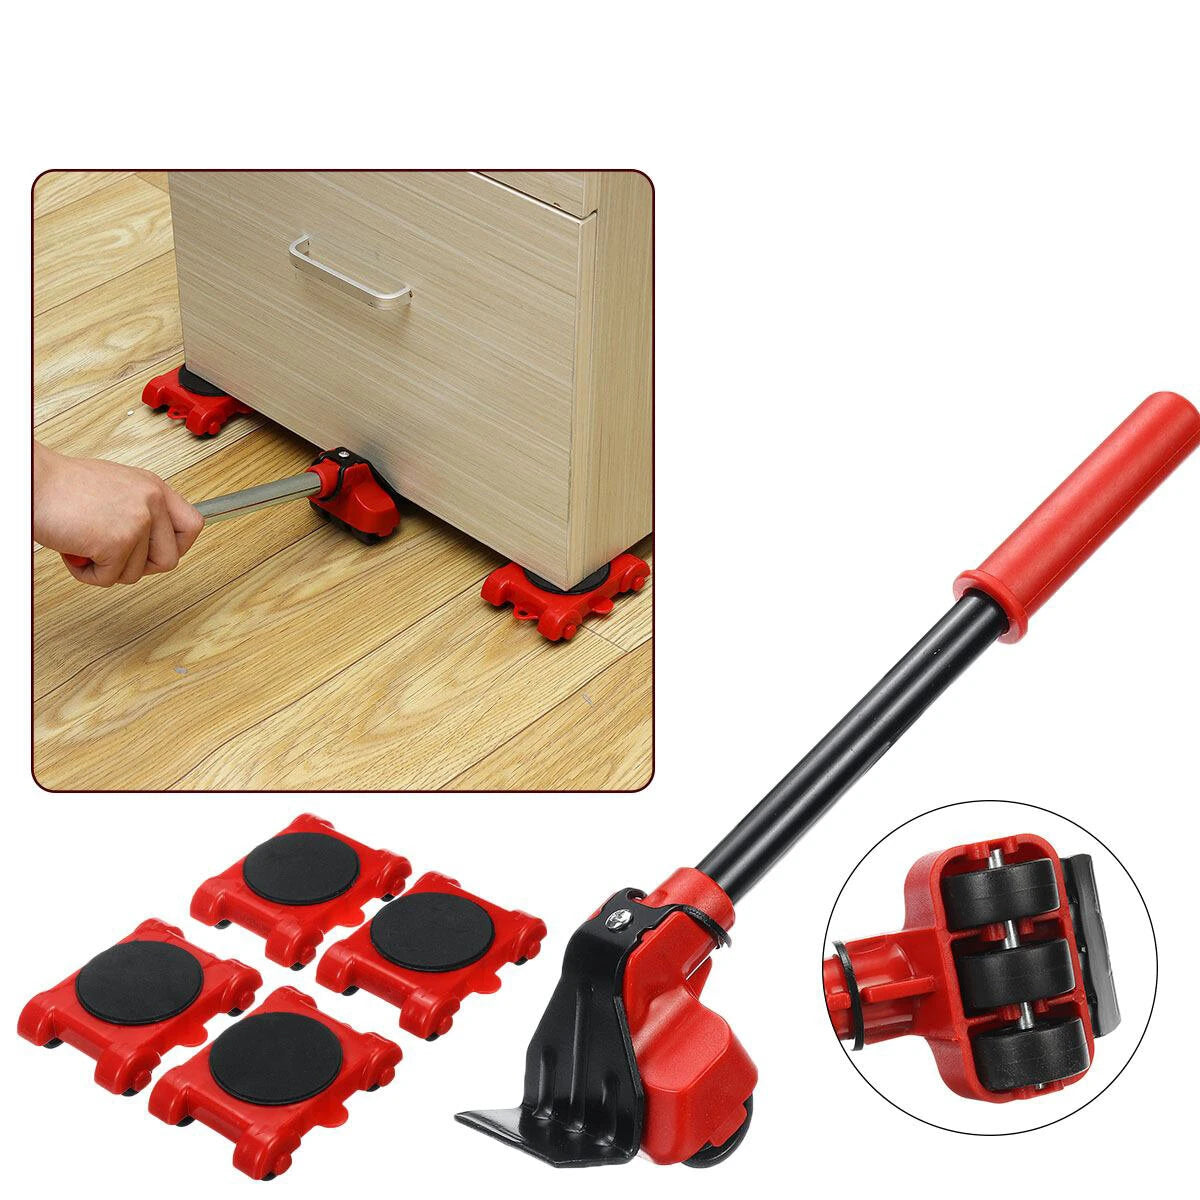 Furniture Mover Tool Set - Furniture Transport Lifter Heavy Duty 4 Wheeled Mover Roller